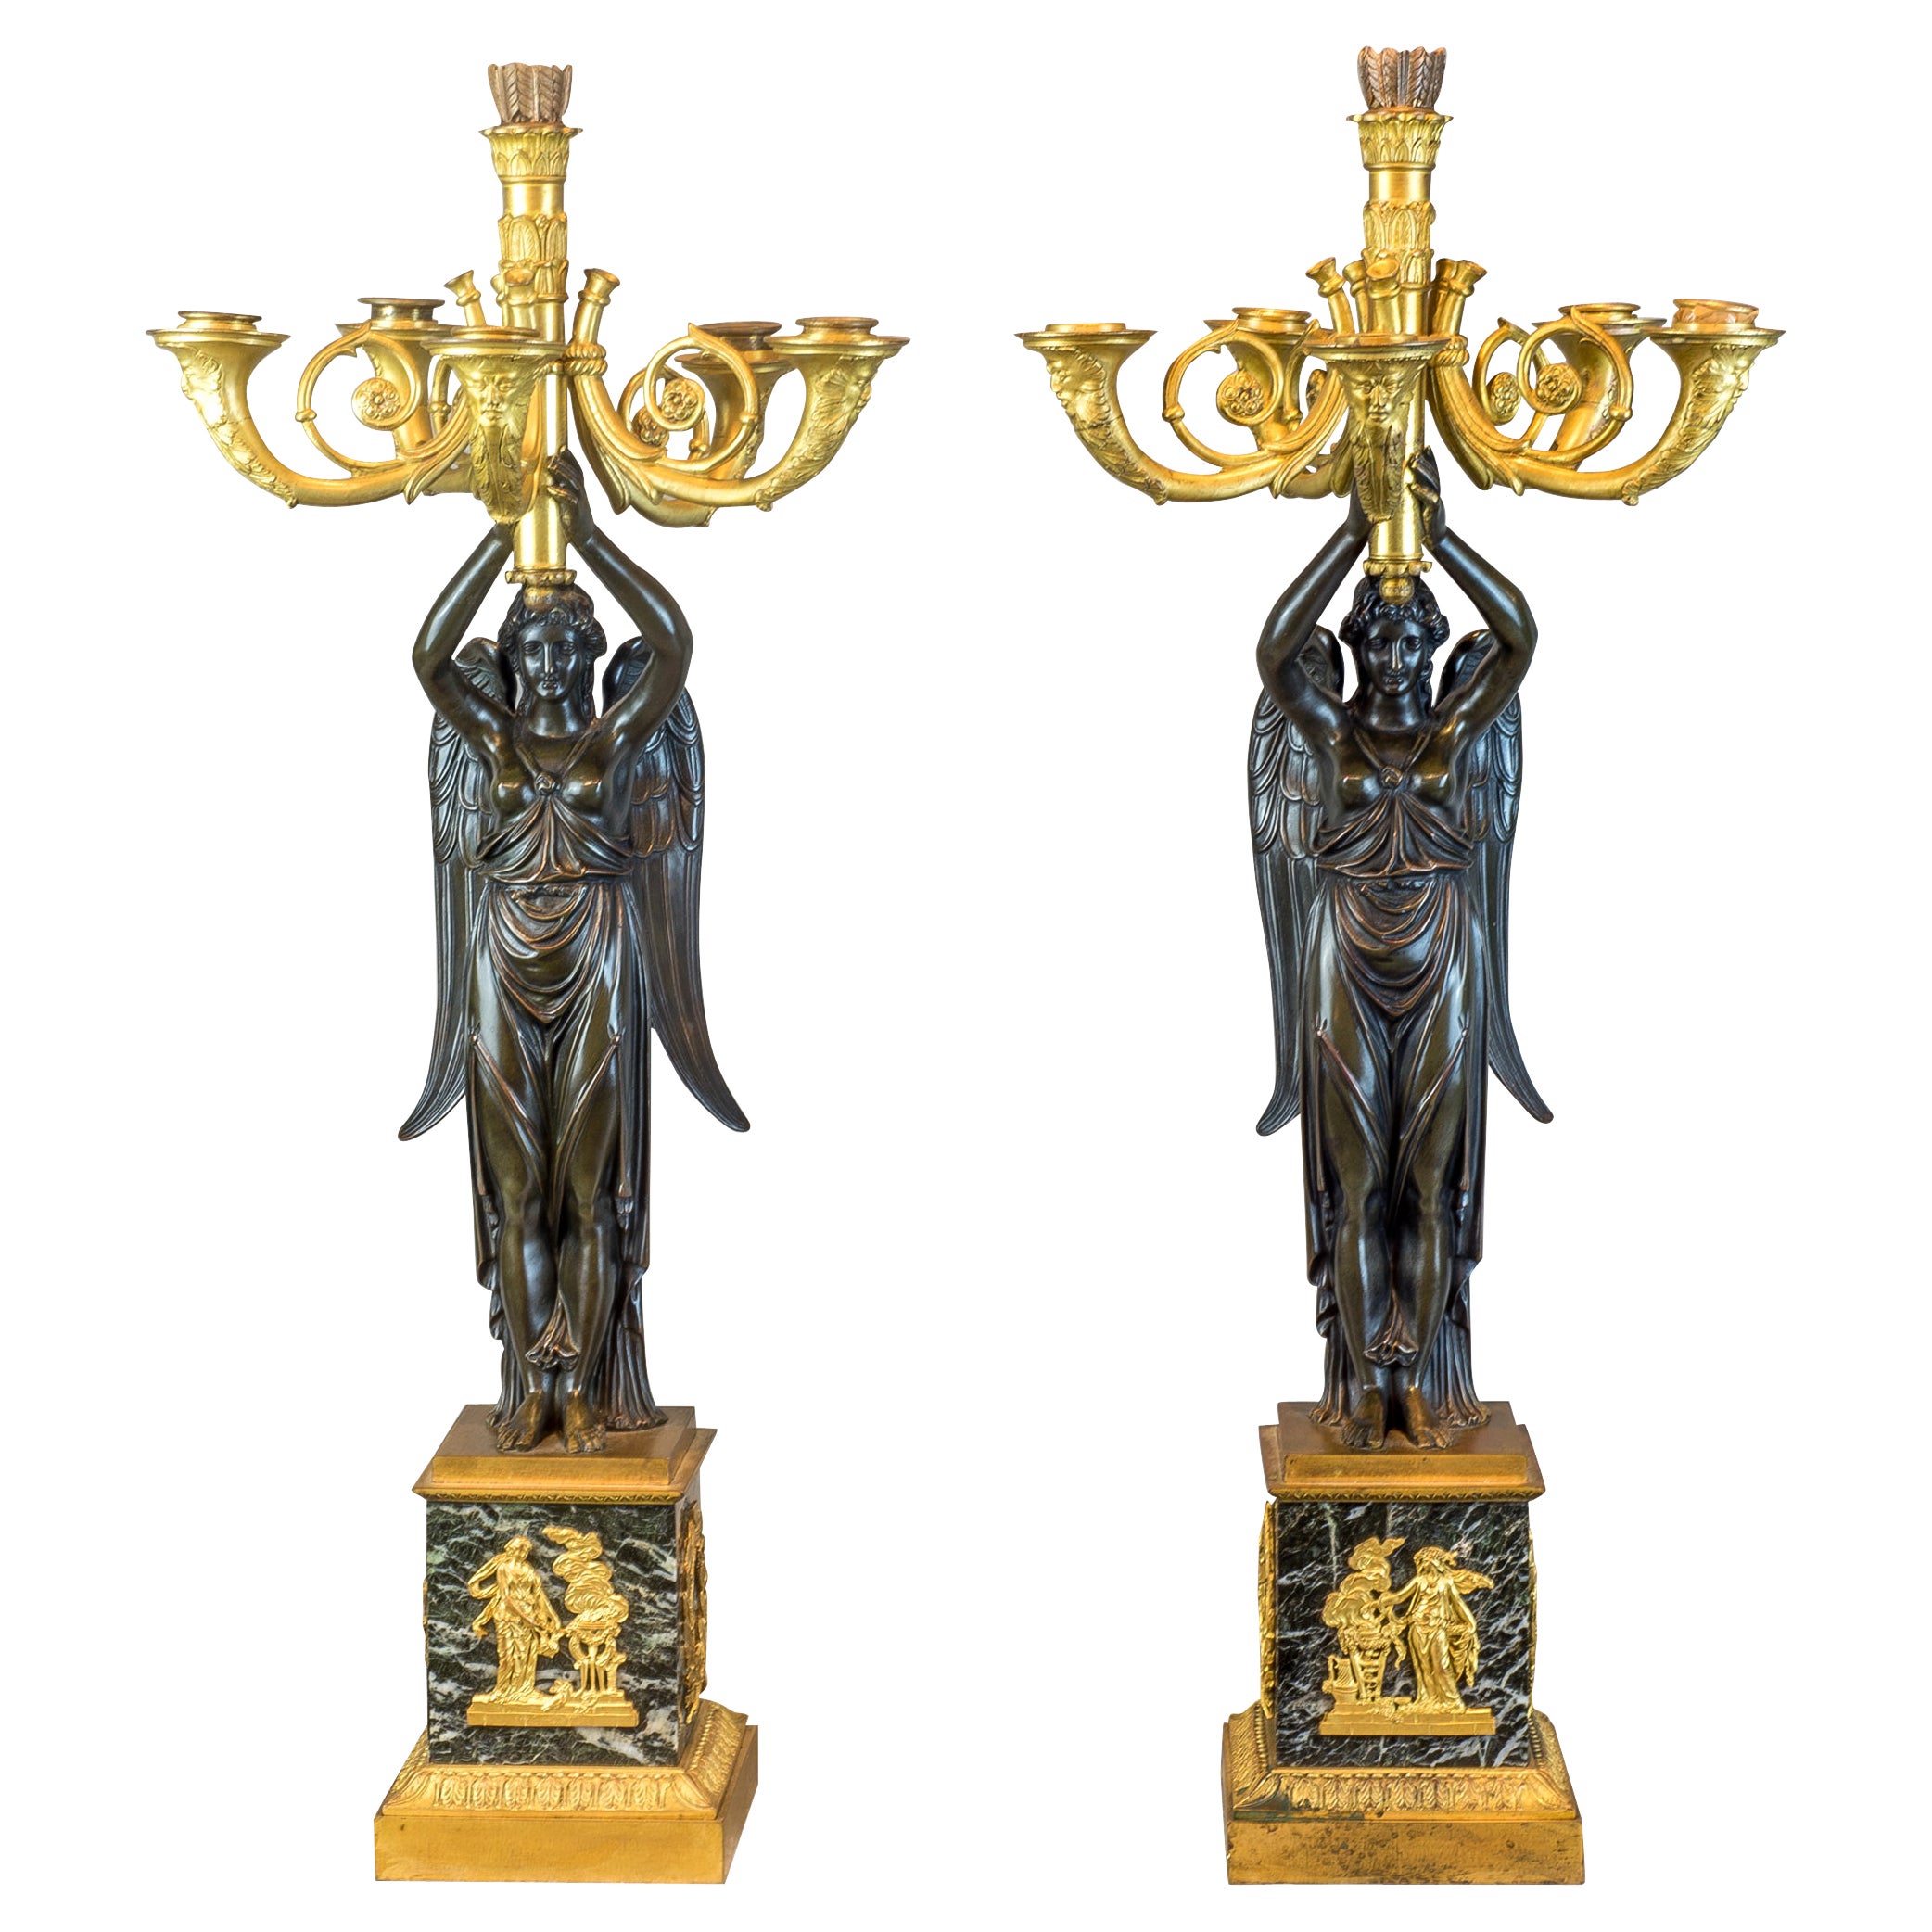  Pair of Empire Gilt and Patinated Bronze Six-Light Figural Candelabras For Sale